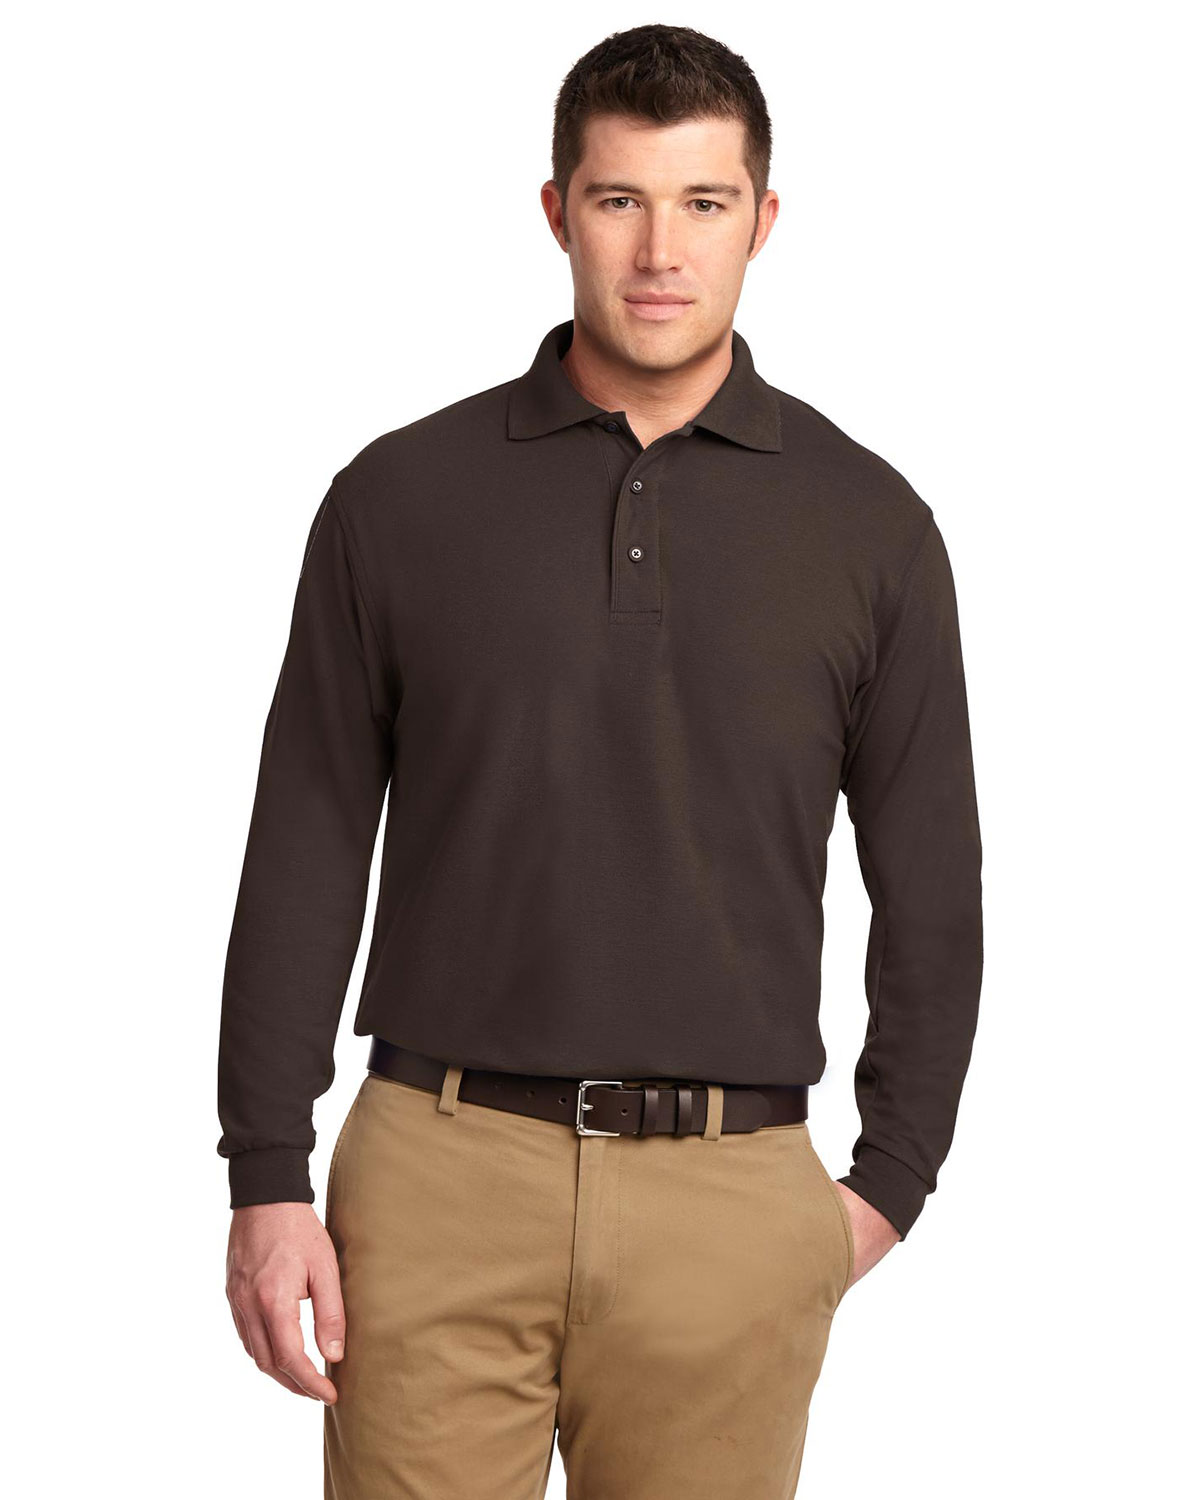 Port Authority K500LS Men Long-Sleeve Silk Touch Polo at Apparelstation